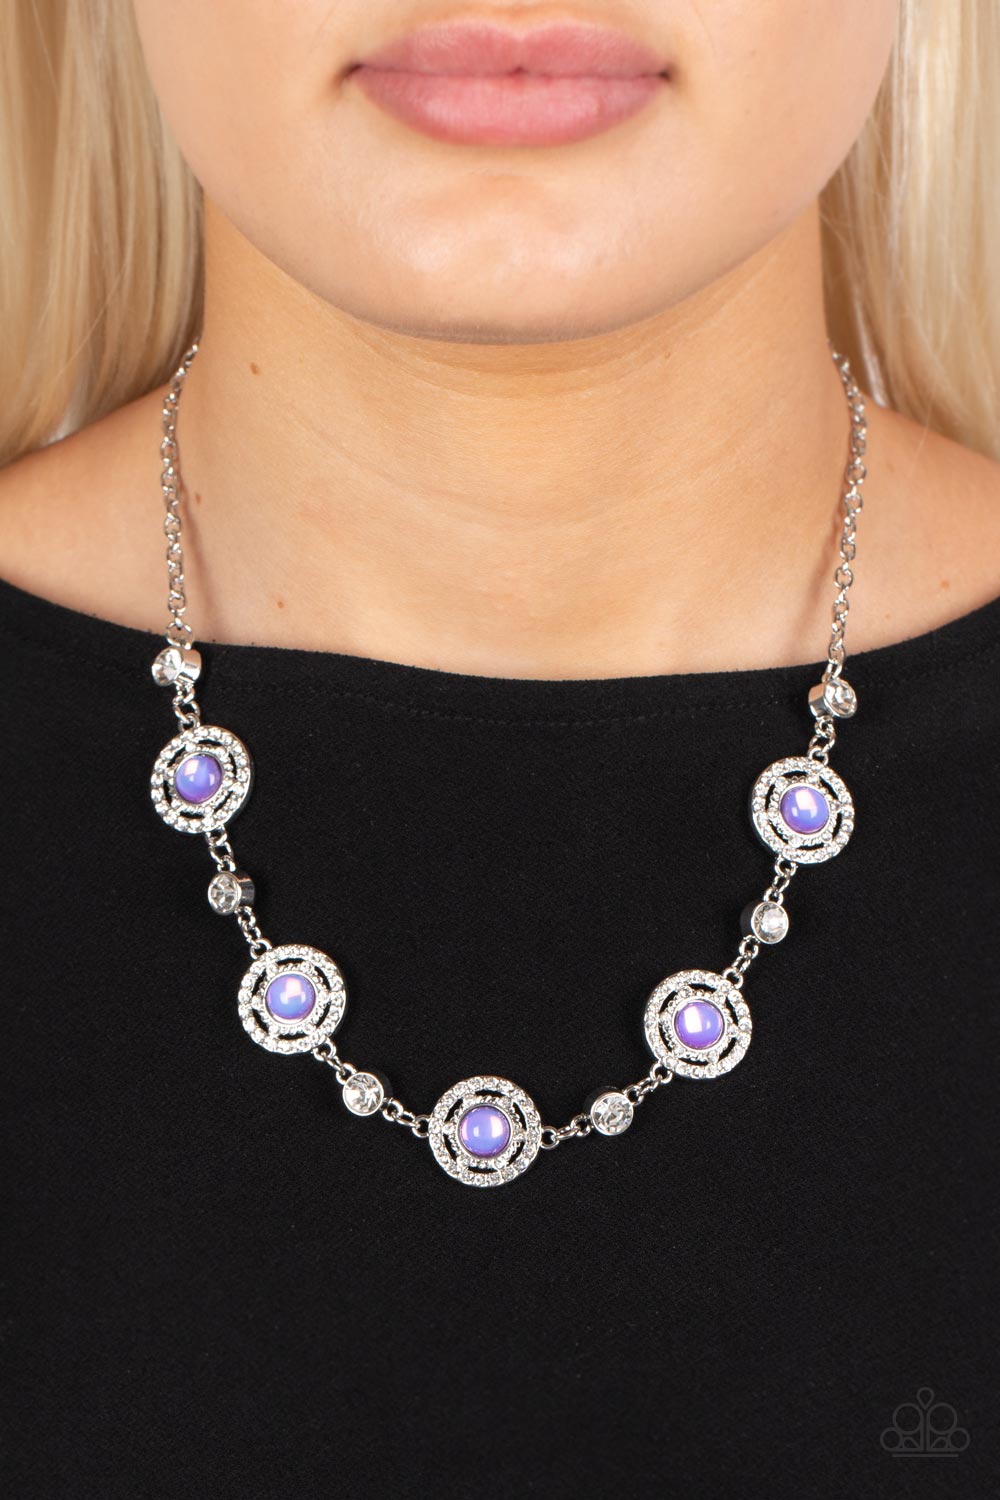 Paparazzi Accessories Summer Dream - Purple Solitaire white rhinestones alternate with rippling circular frames of silver dusted in dainty white rhinestones, creating an enchanting statement piece. Featured in the center of the scintillating frames, glass